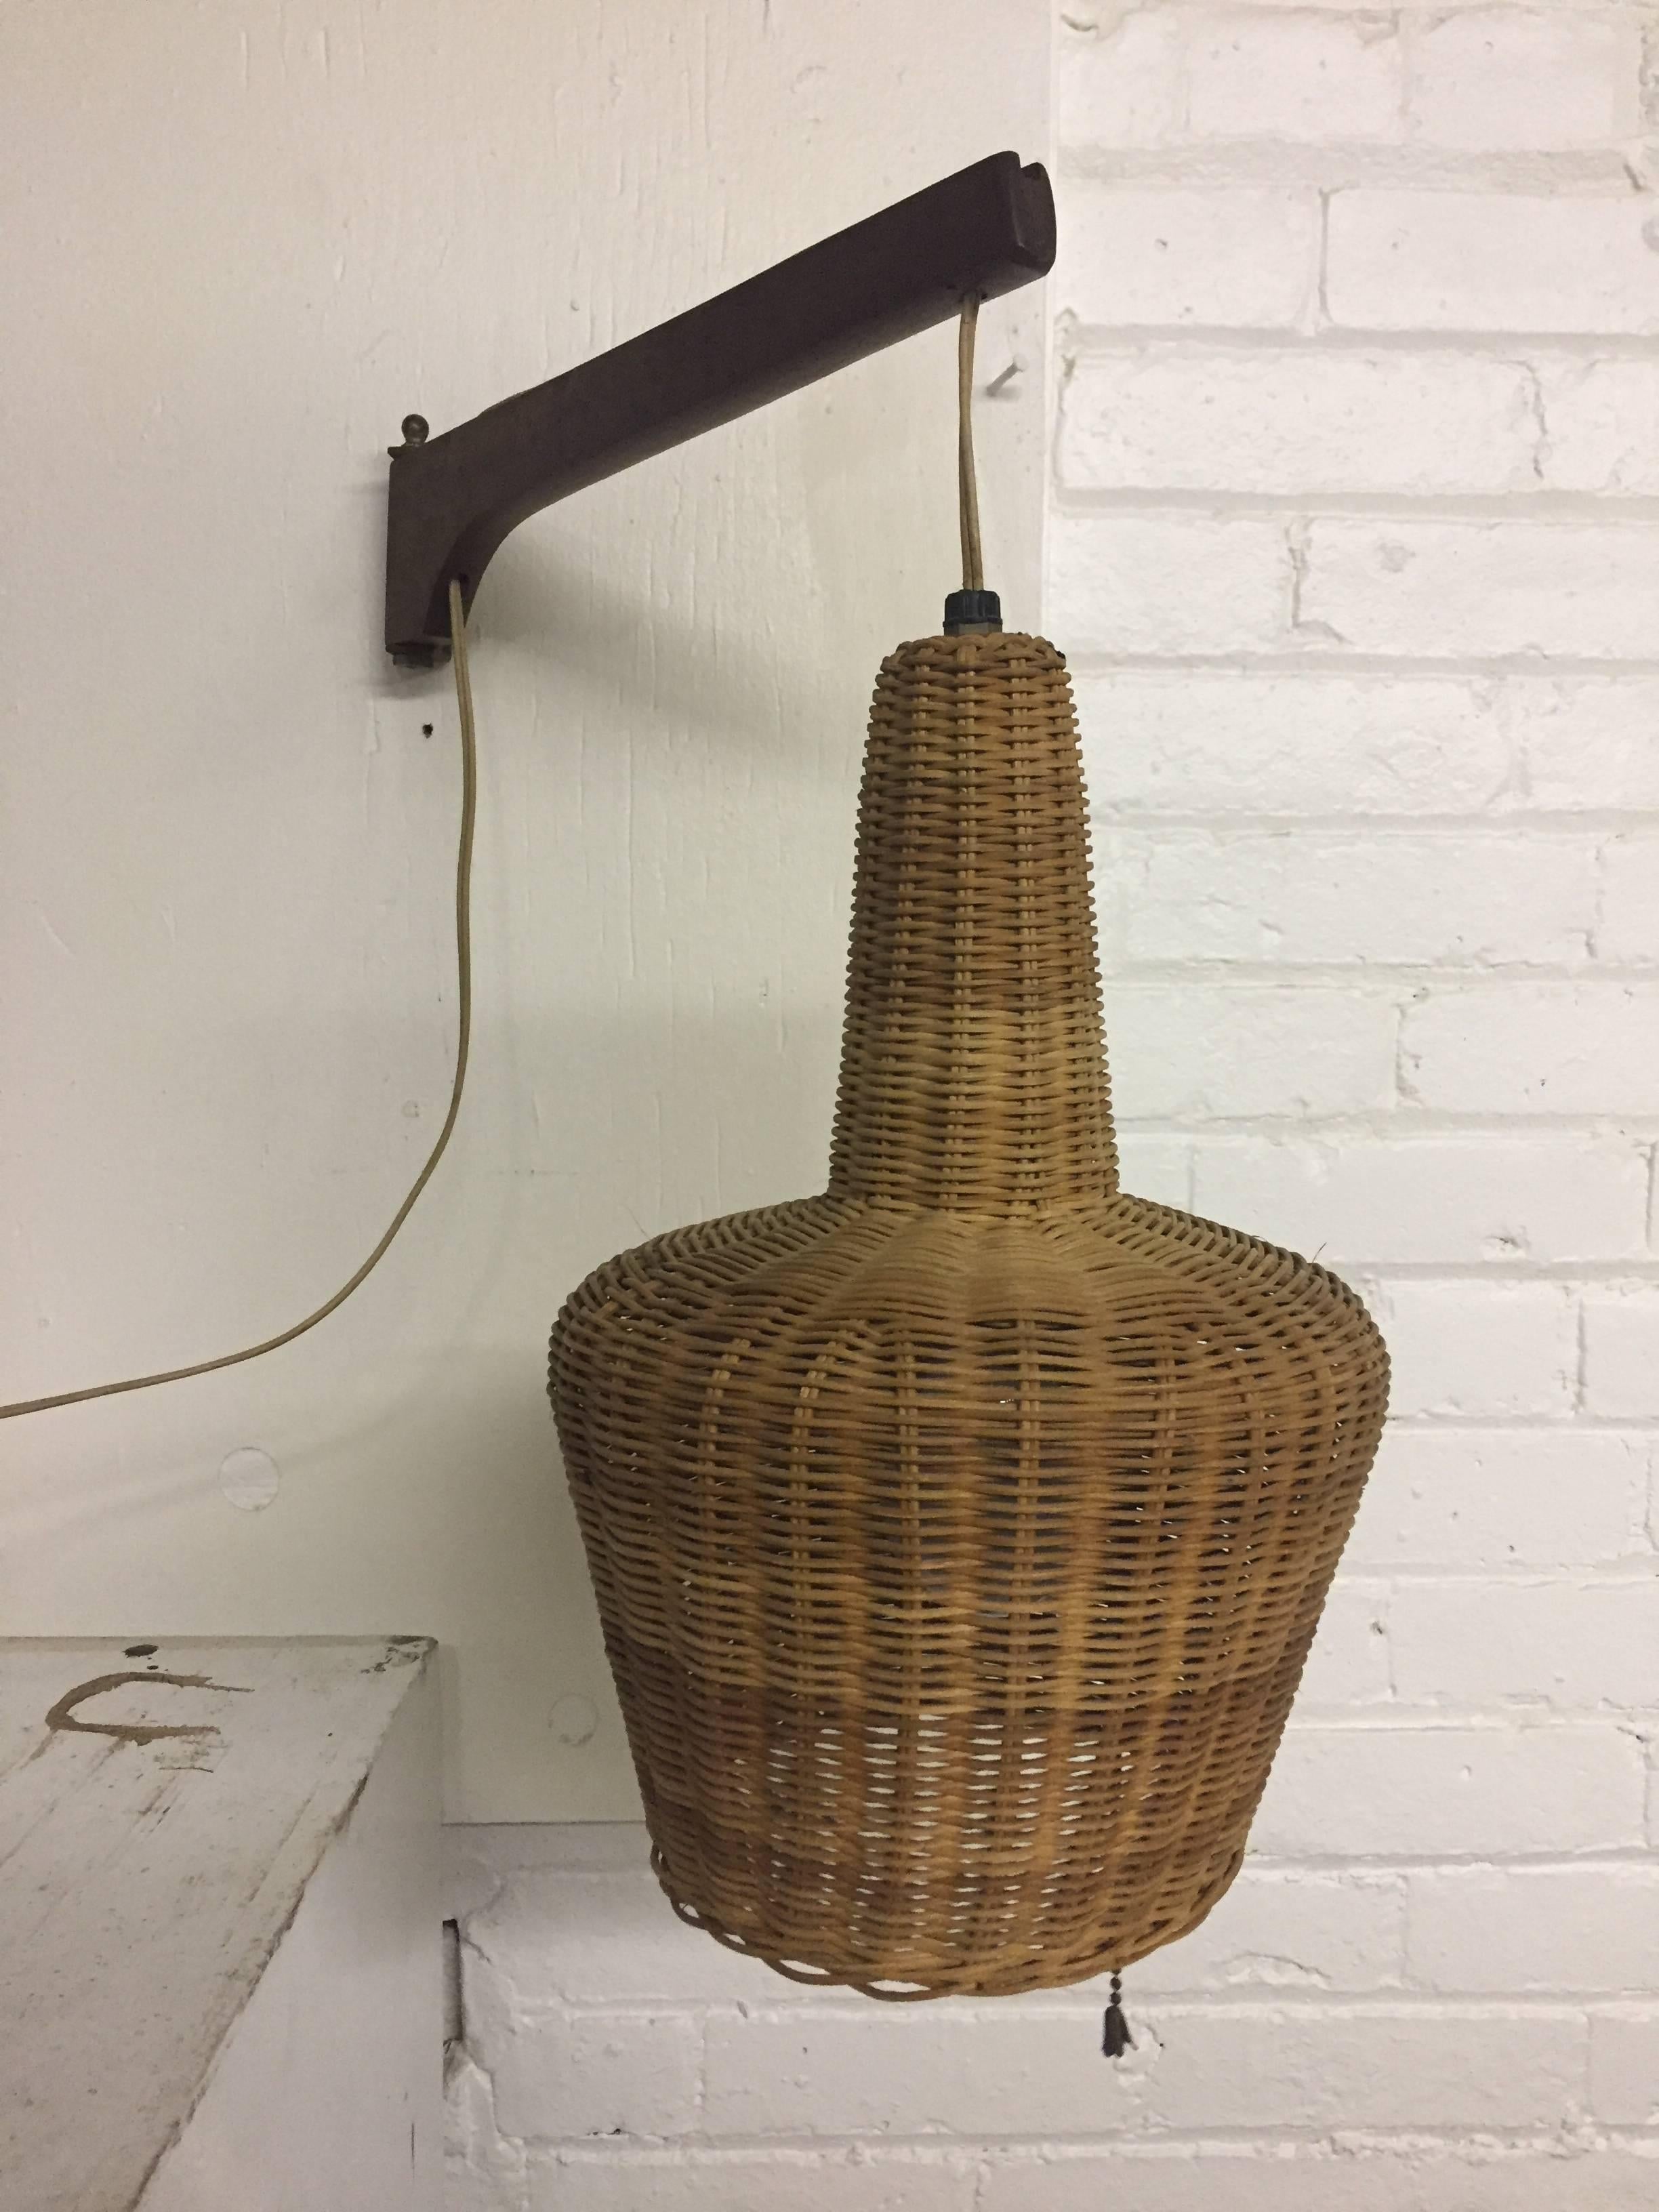 Finely woven wicker hanging shade with a solid teak/walnut swing arm. Original wiring. Pull chain. Probably Danish in origin, circa 1950-1960. Very good, original condition. Unsigned.

Shade measures 8" diameter x 13" high. 18" deep